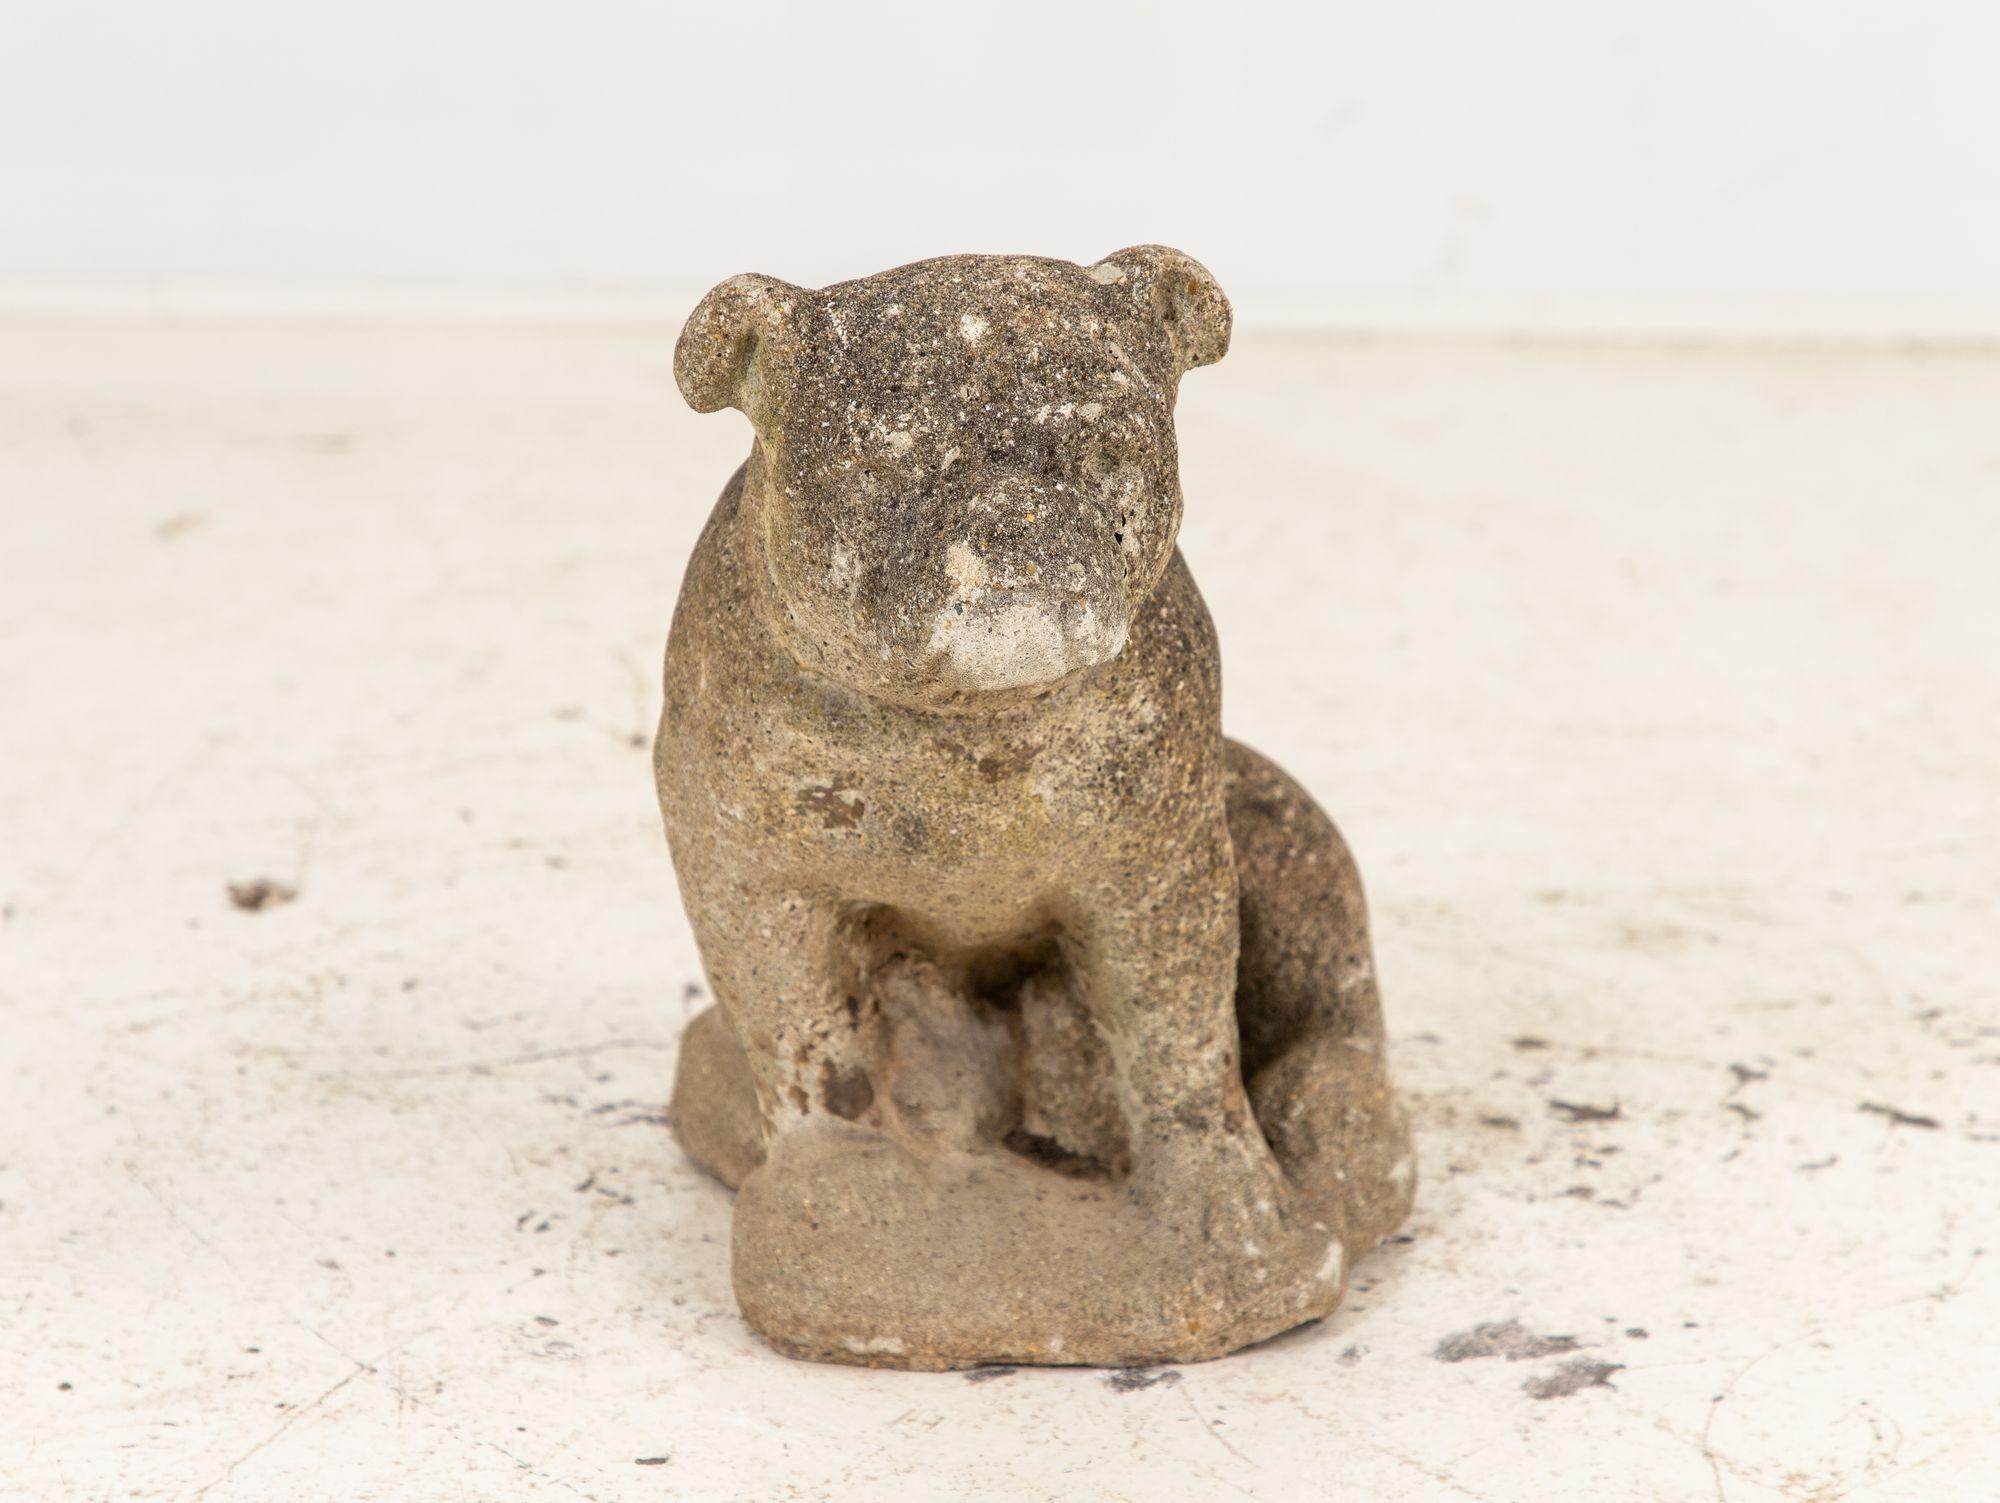 This mid-20th-century English Bulldog garden ornament, crafted from concrete, showcases a captivating patina that enhances its charm. Despite minor imperfections, it retains its original form with remarkable integrity. The coveted patina, with